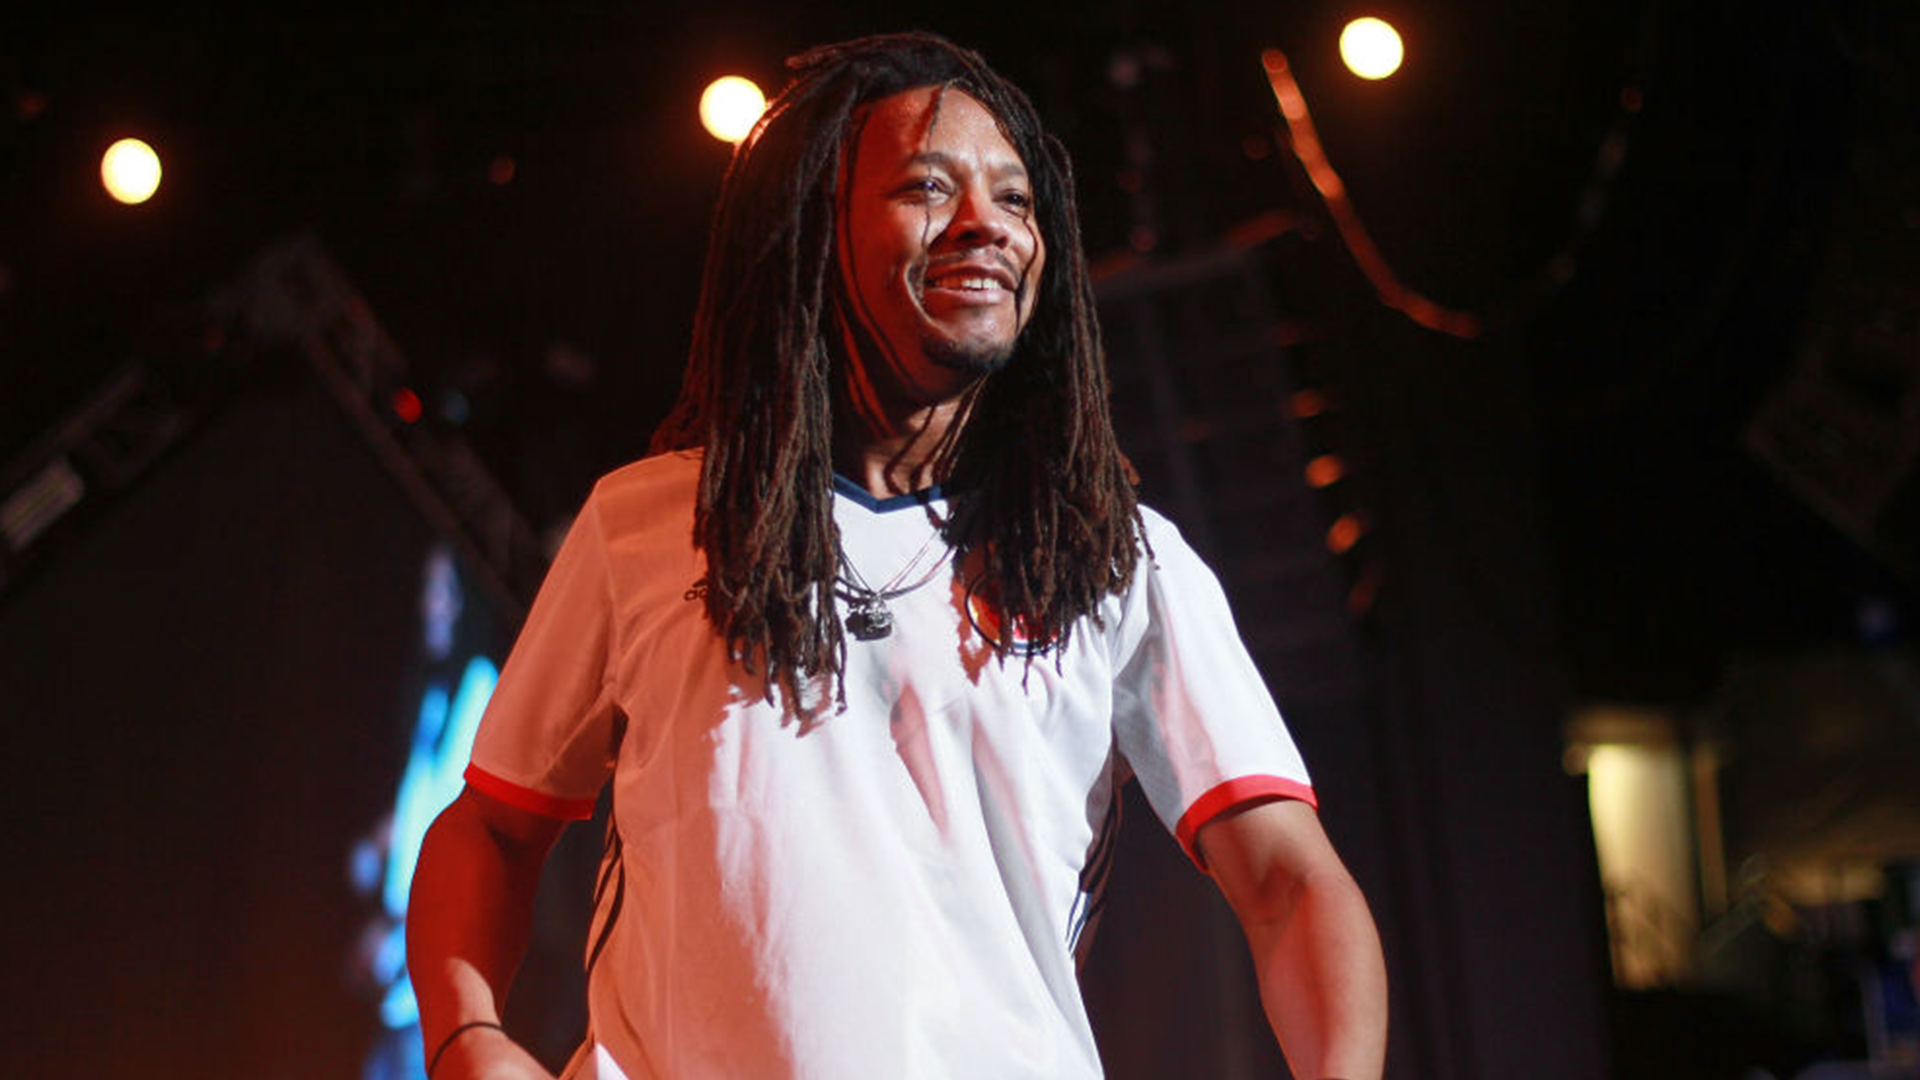 Lupe Fiasco Is Now A Visiting Professor At The Massachusetts Institute Of Technology